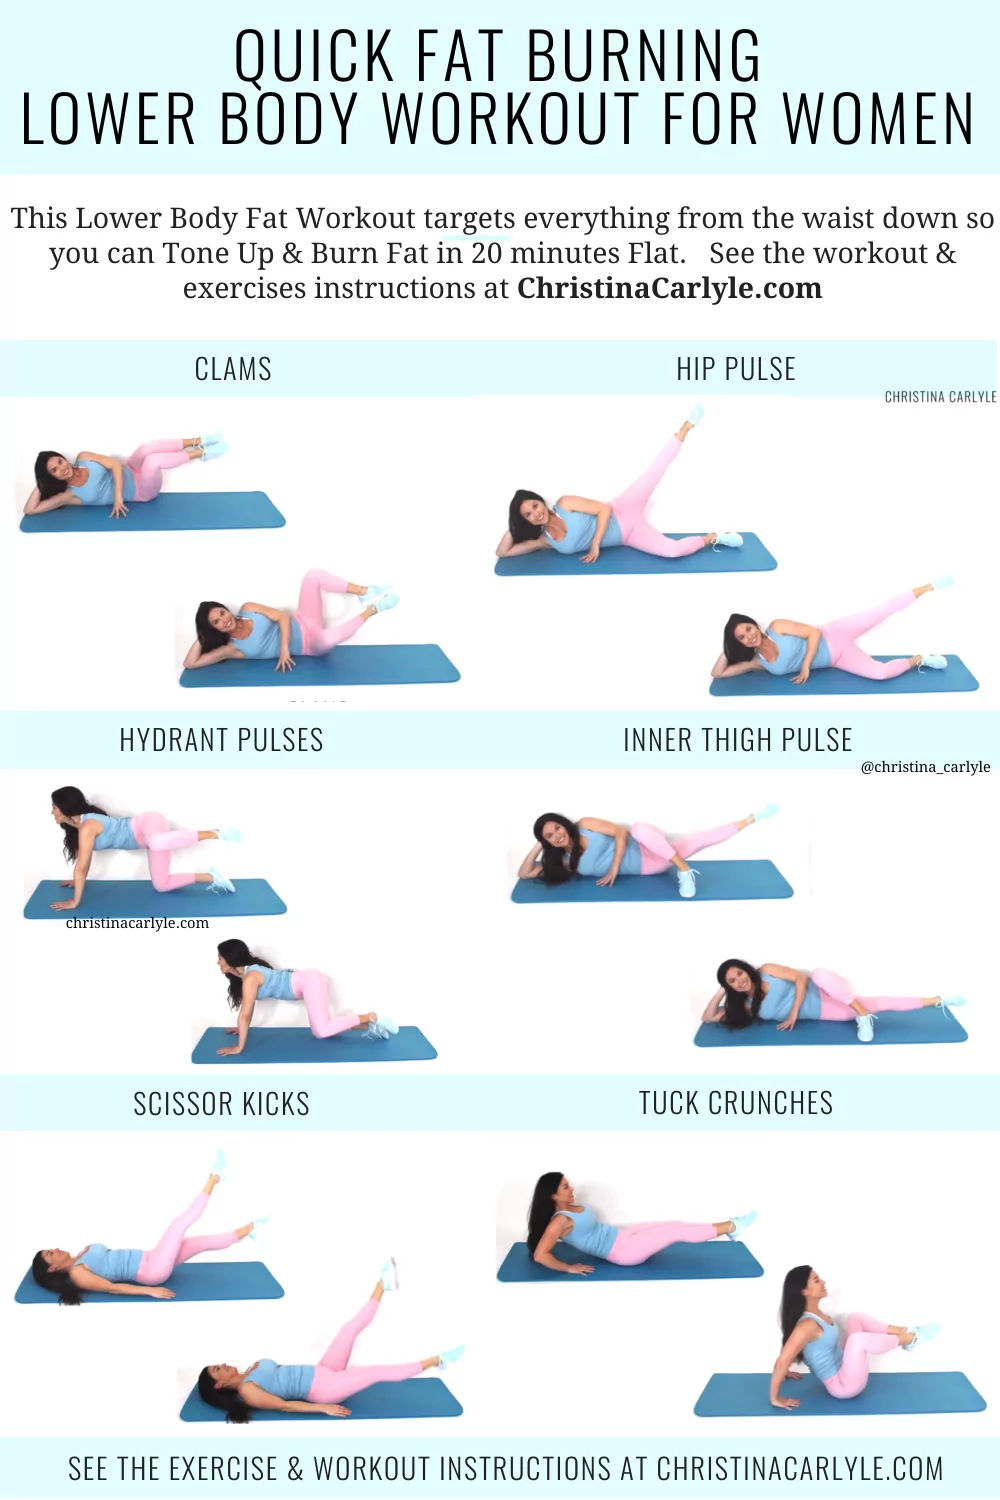 text that says Quick Fat Burning Lower Body Workout for Women and trainer Christina Carlyle doing 6 lower body exercises